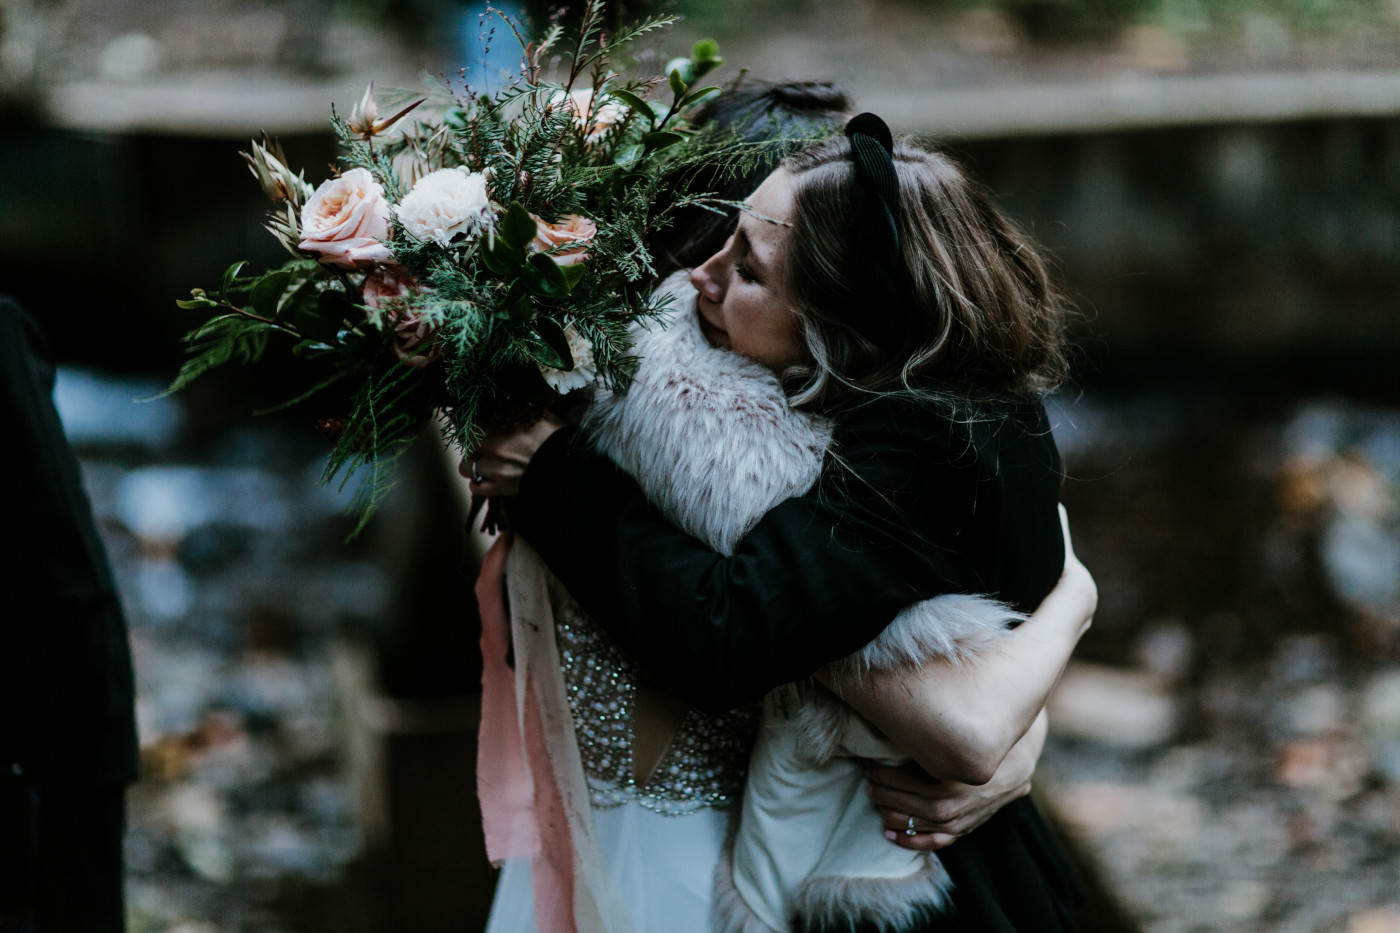 The brides hug family and friends. Elopement photography at the Columbia River Gorge by Sienna Plus Josh.